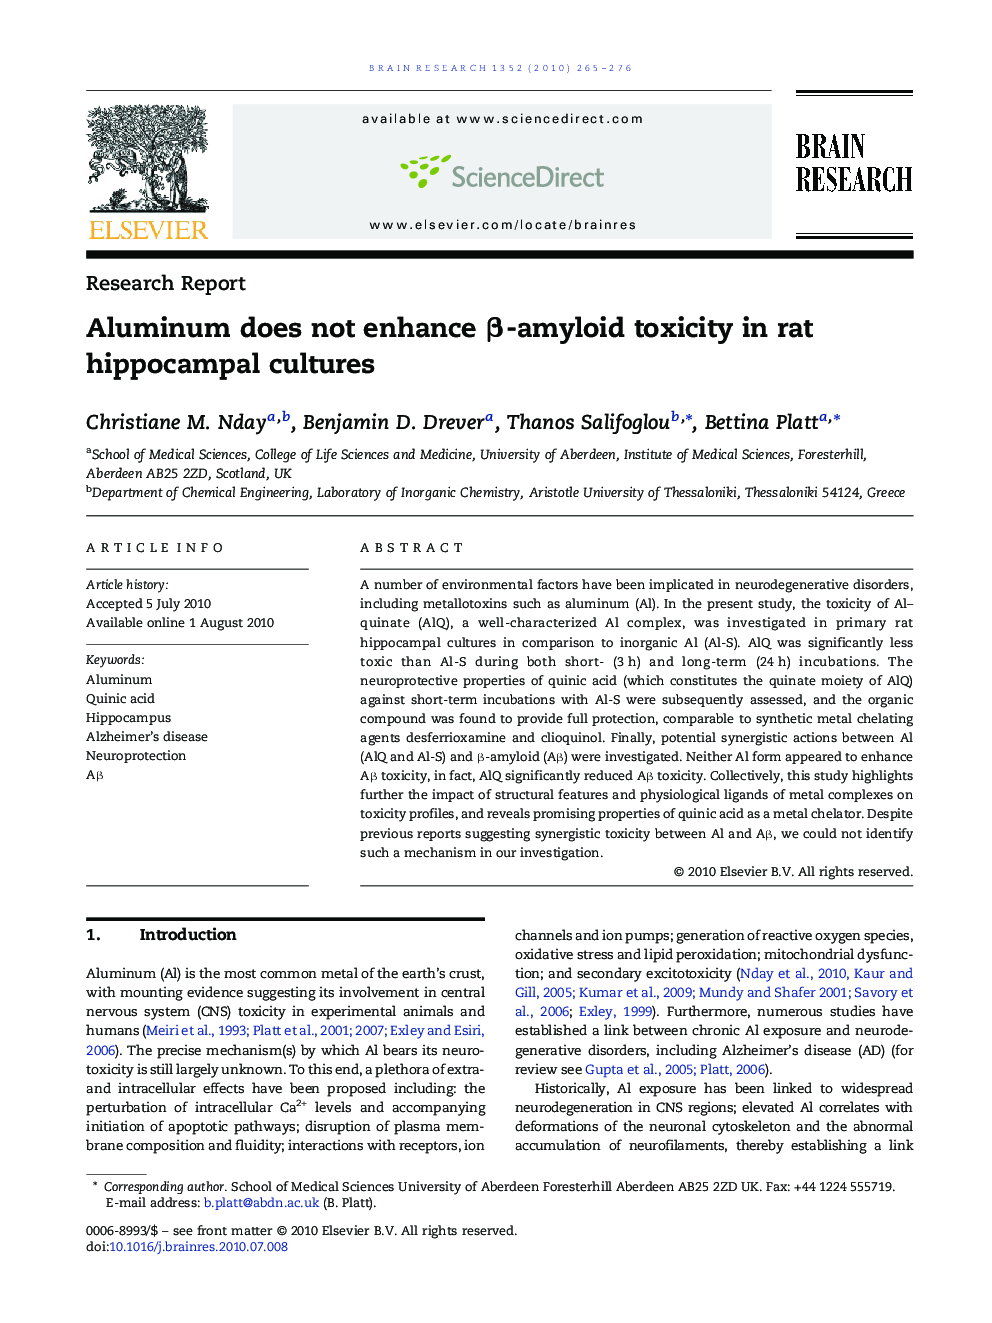 Aluminum does not enhance β-amyloid toxicity in rat hippocampal cultures